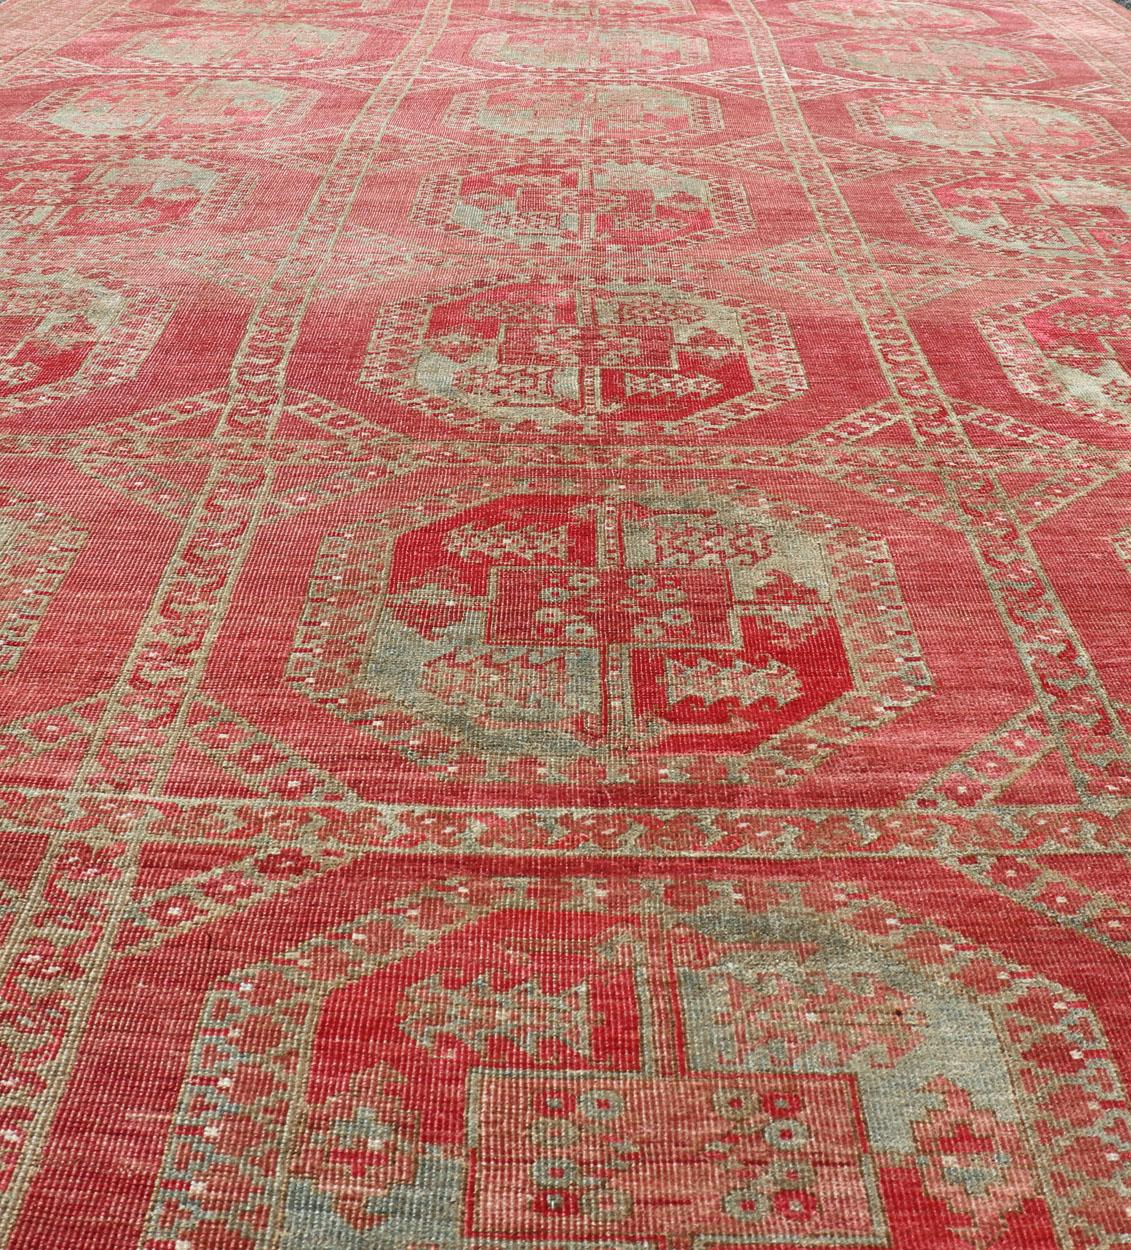 Hand-Knotted Wool Ersari Rug in Wool with Gul Design in Shades of Red & Green 3